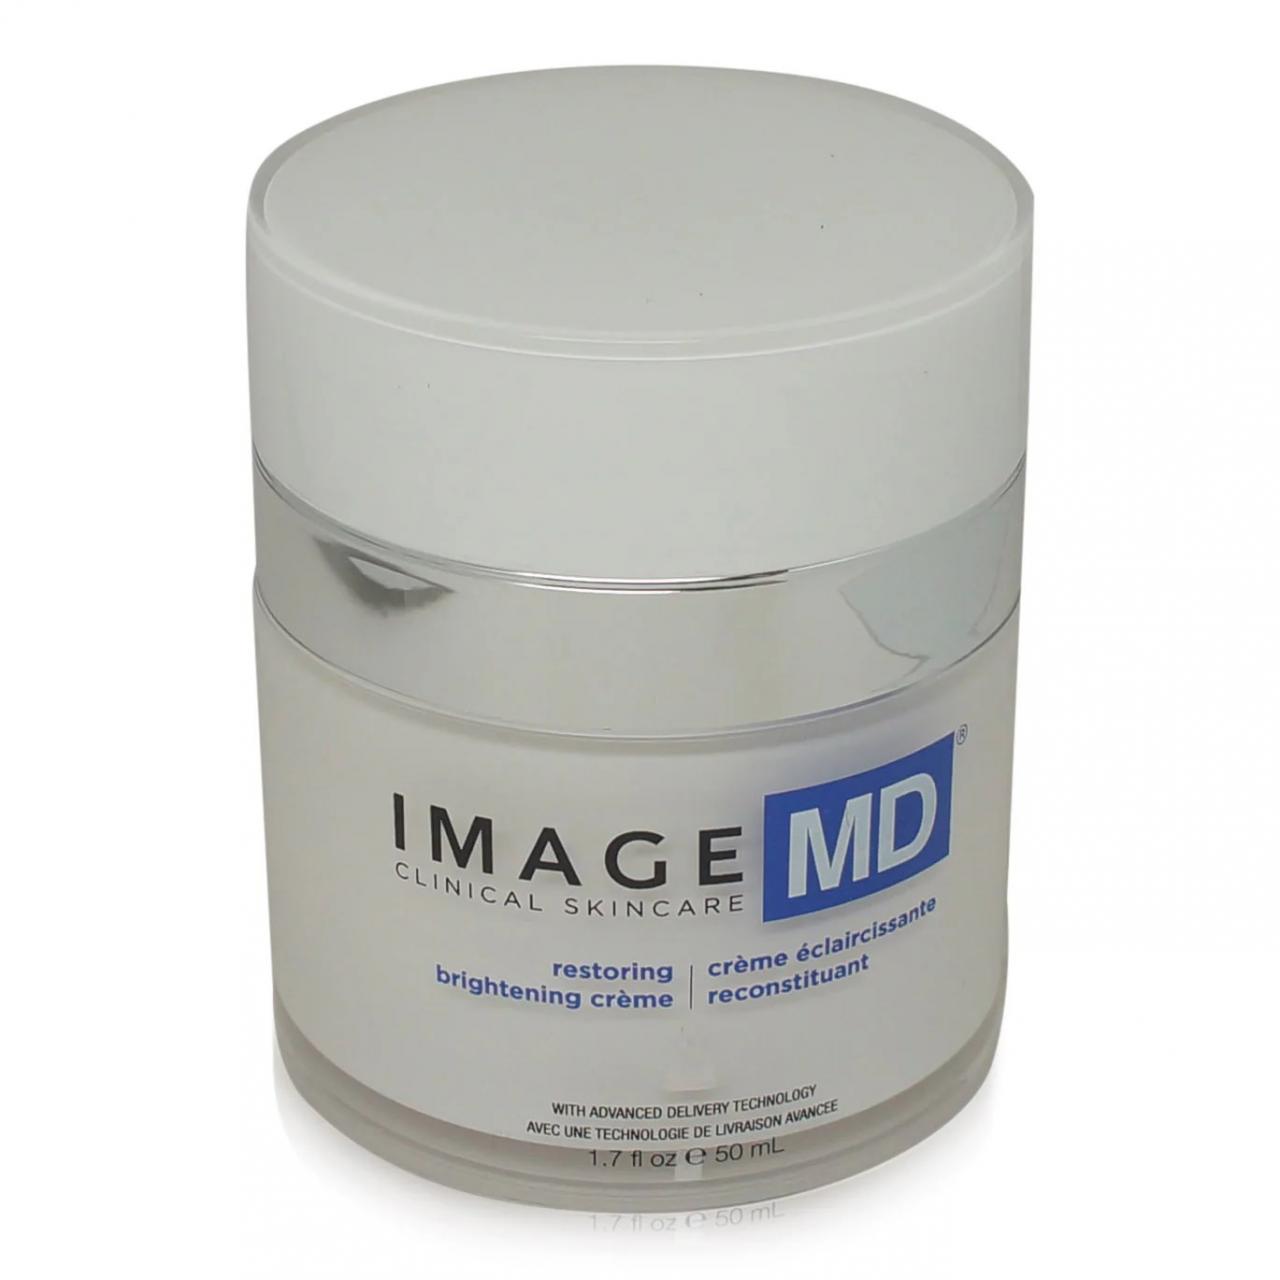 Image MD Skincare, A Revolutionary Approach to Personalized Skincare